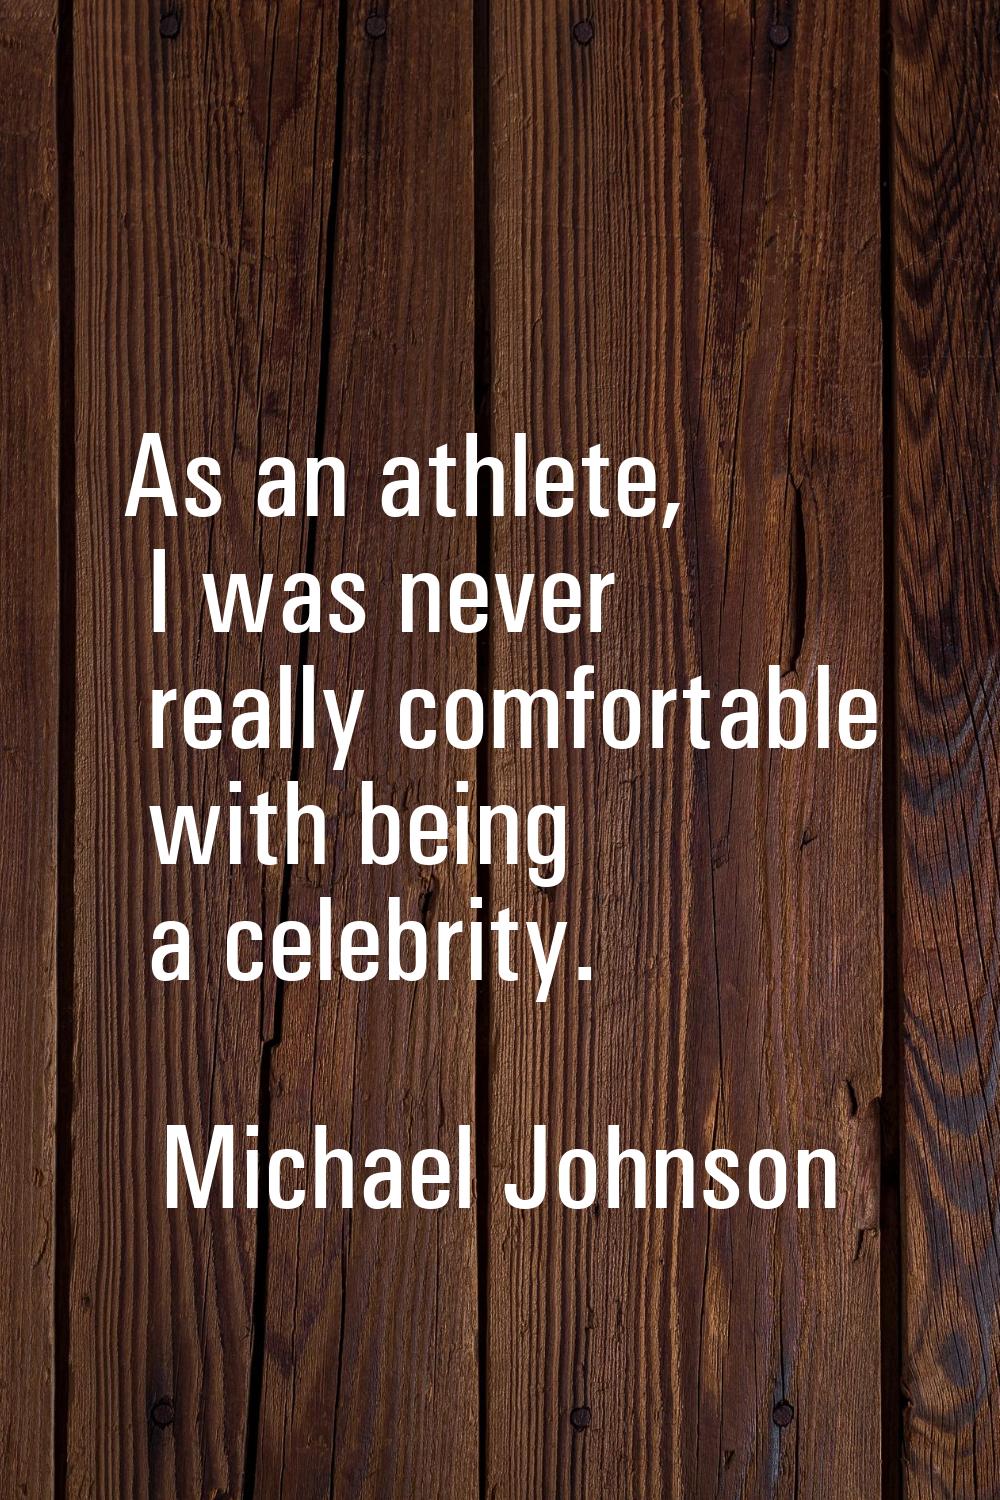 As an athlete, I was never really comfortable with being a celebrity.